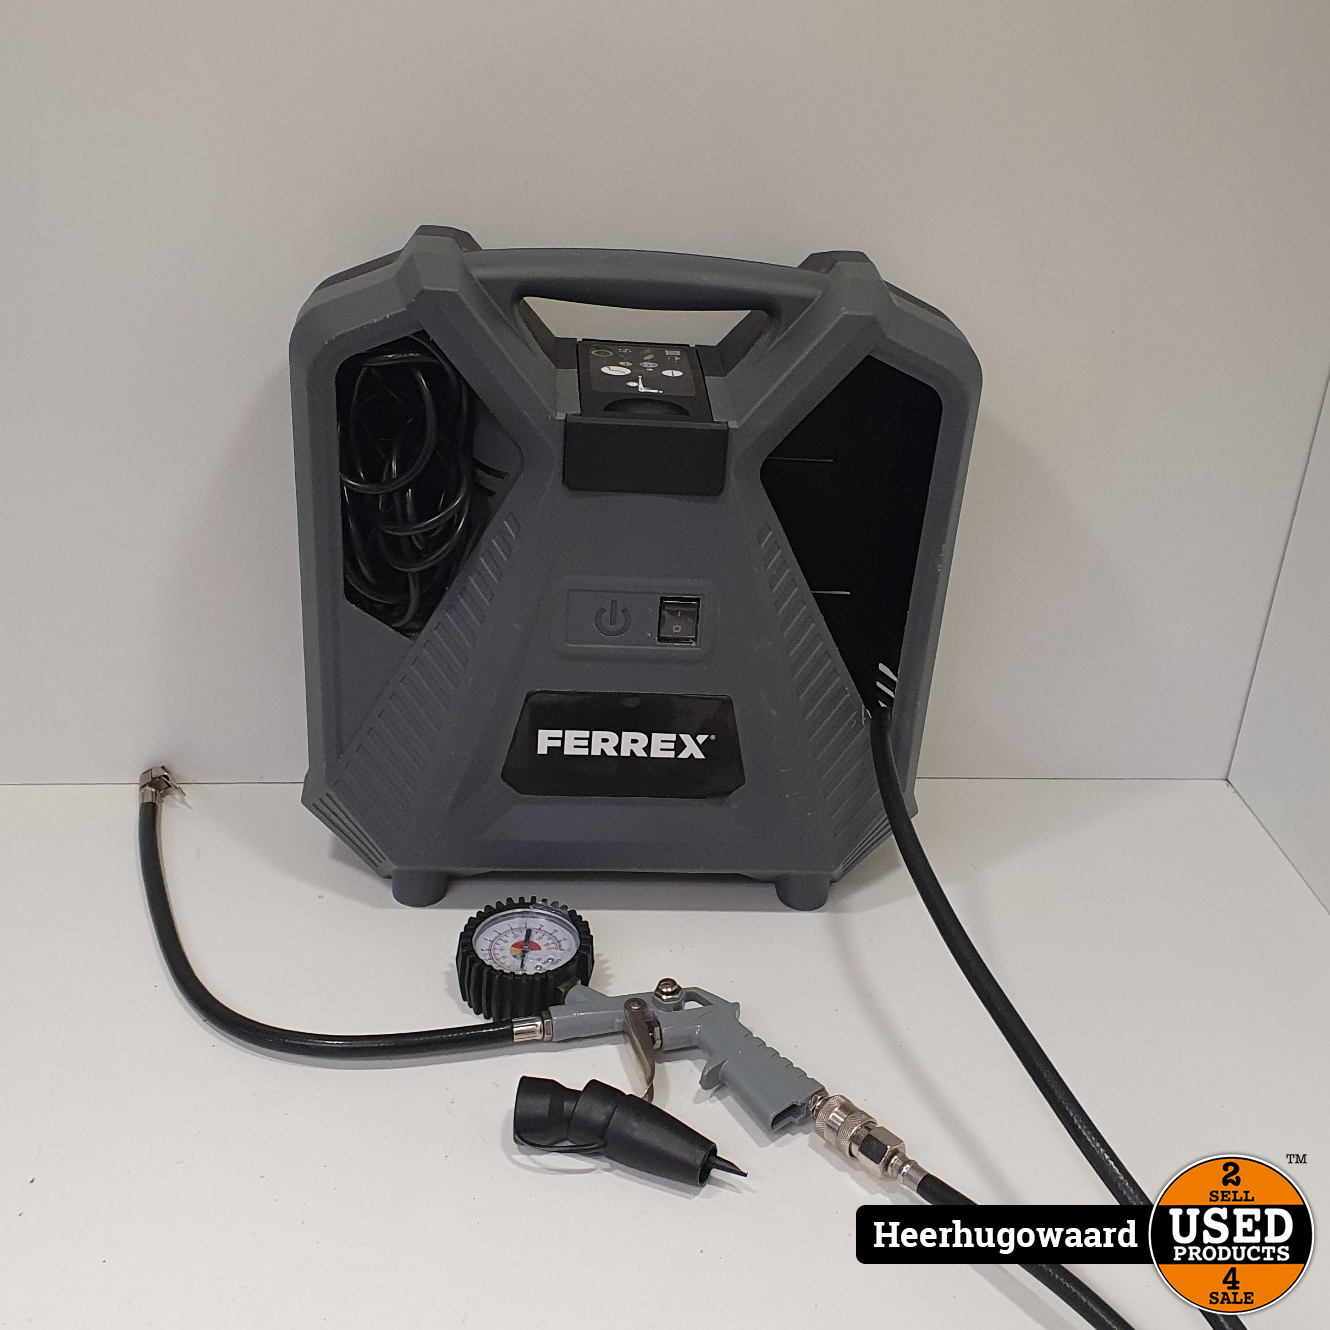 Ferrex CQB180D-1 Draagbare Compressor in Nette Staat Used Products